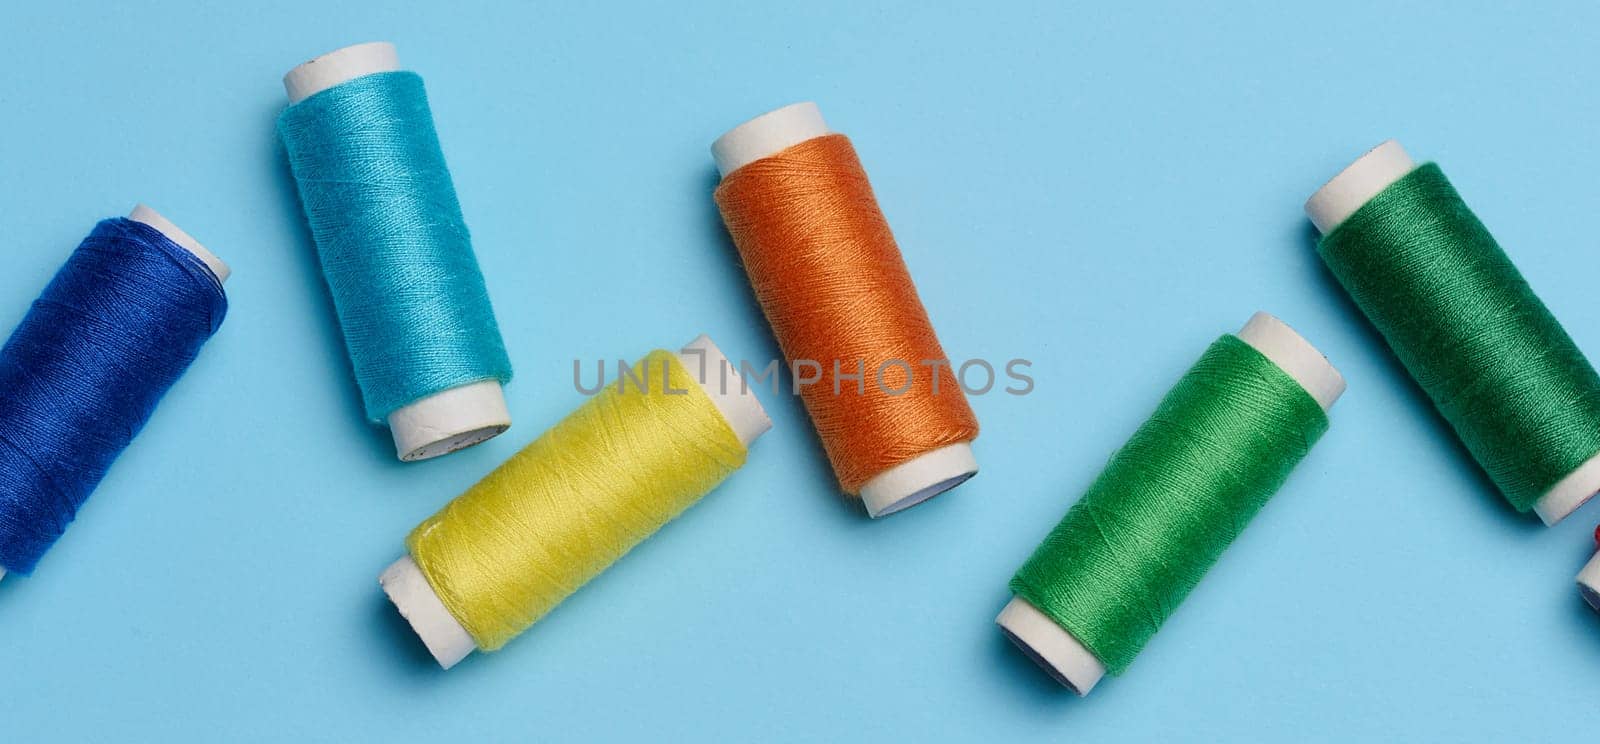 Multicolored spools of sewing threads on a blue background, top view